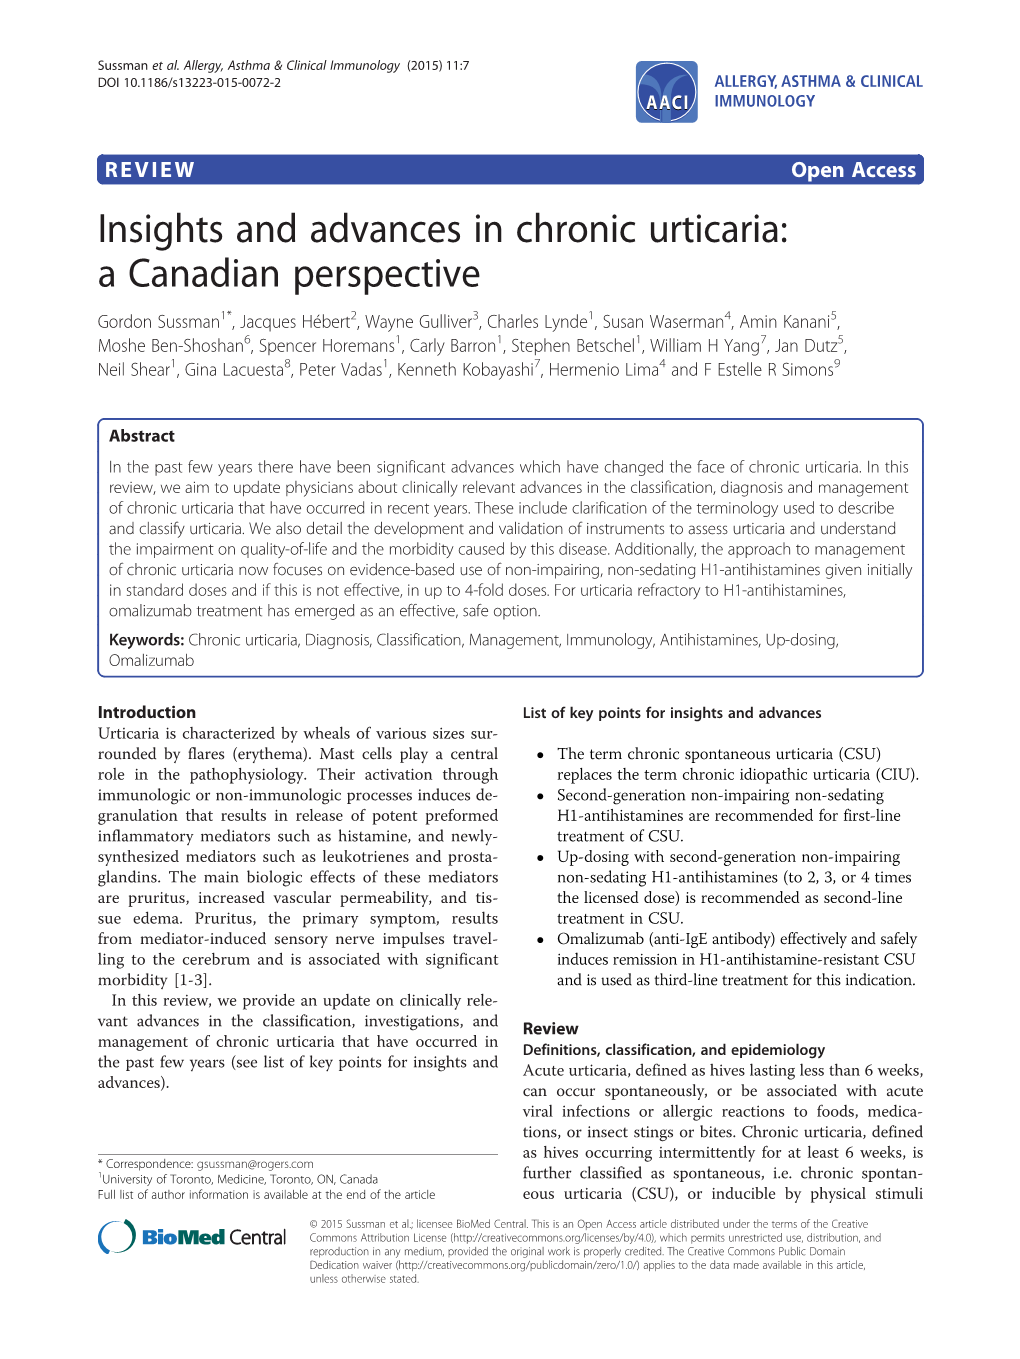 Insights and Advances in Chronic Urticaria